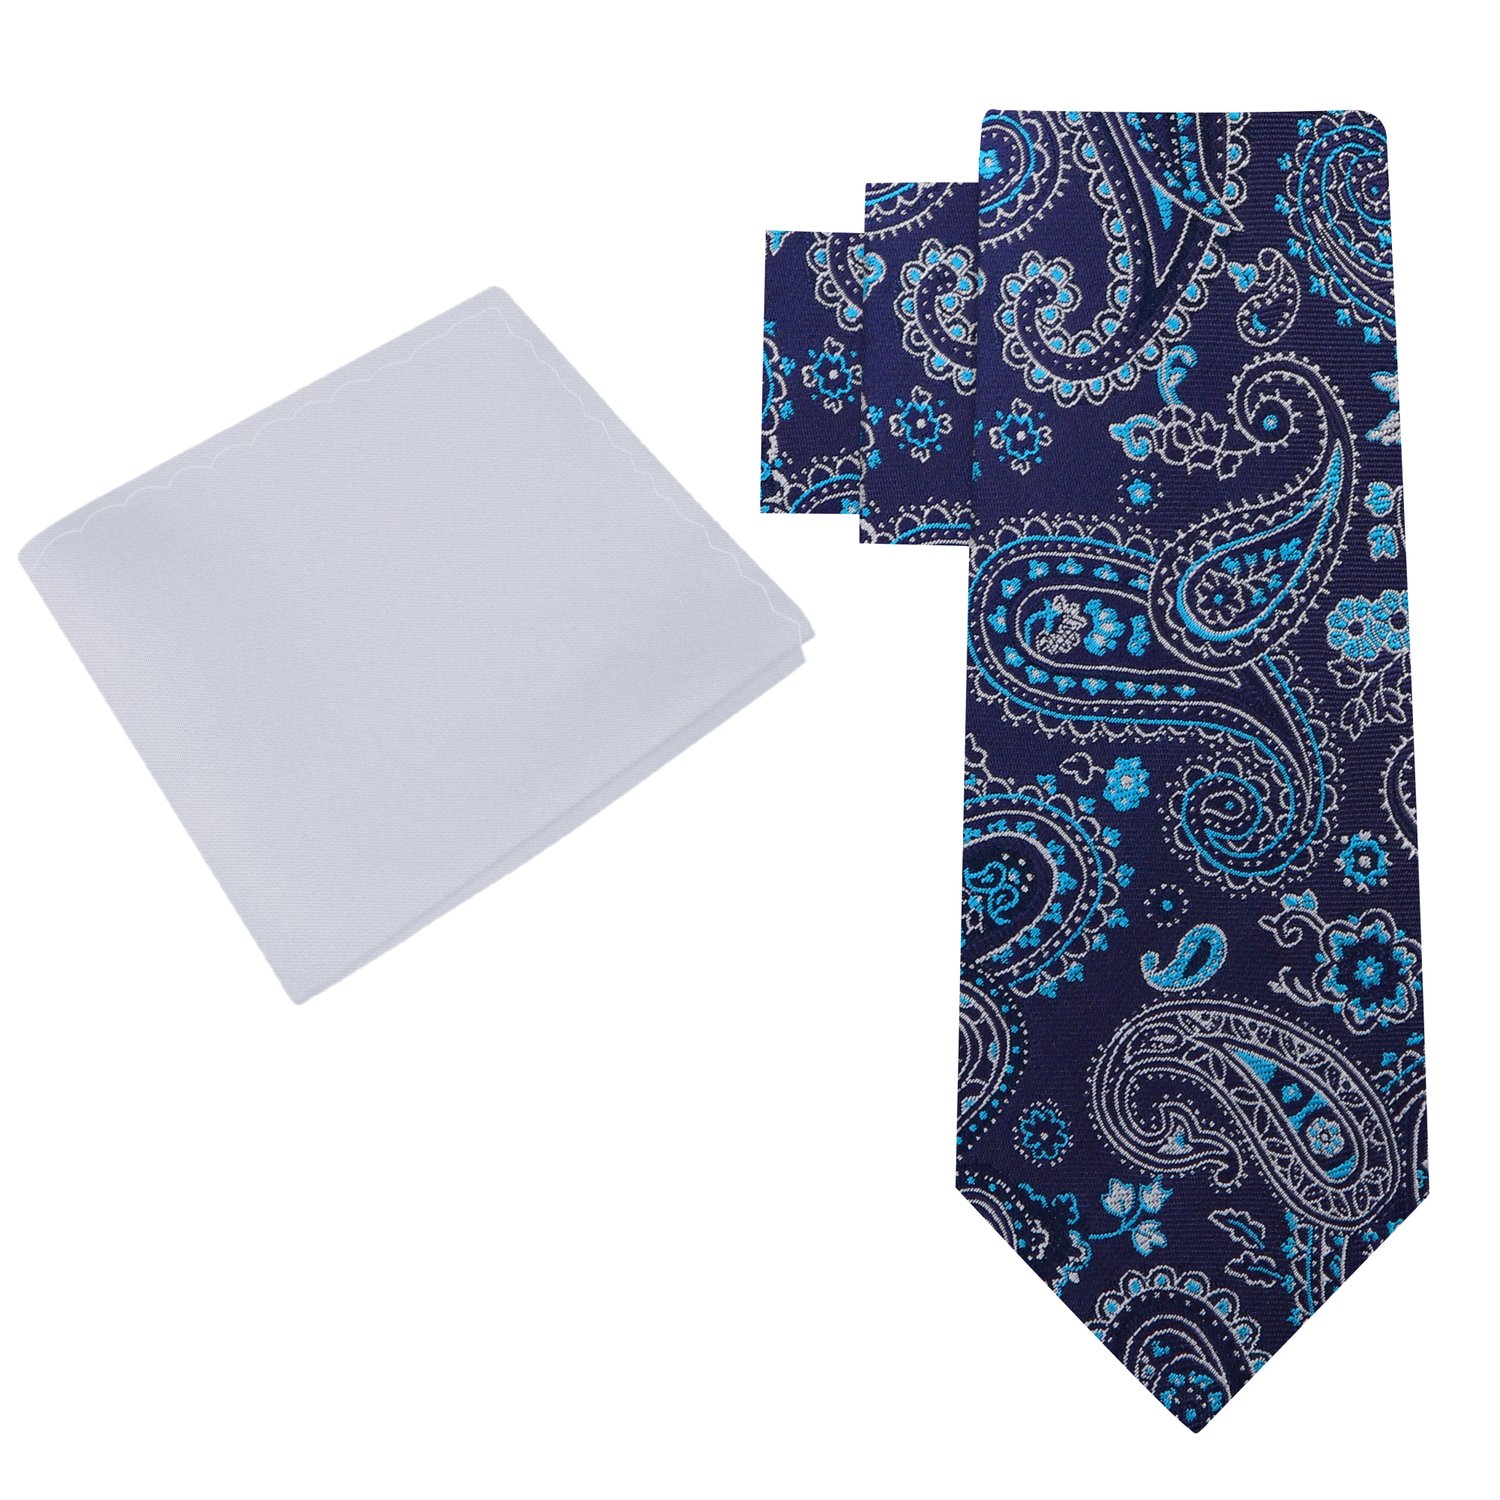 Alt View: Shades of Blue Paisley Necktie and Light Grey Square